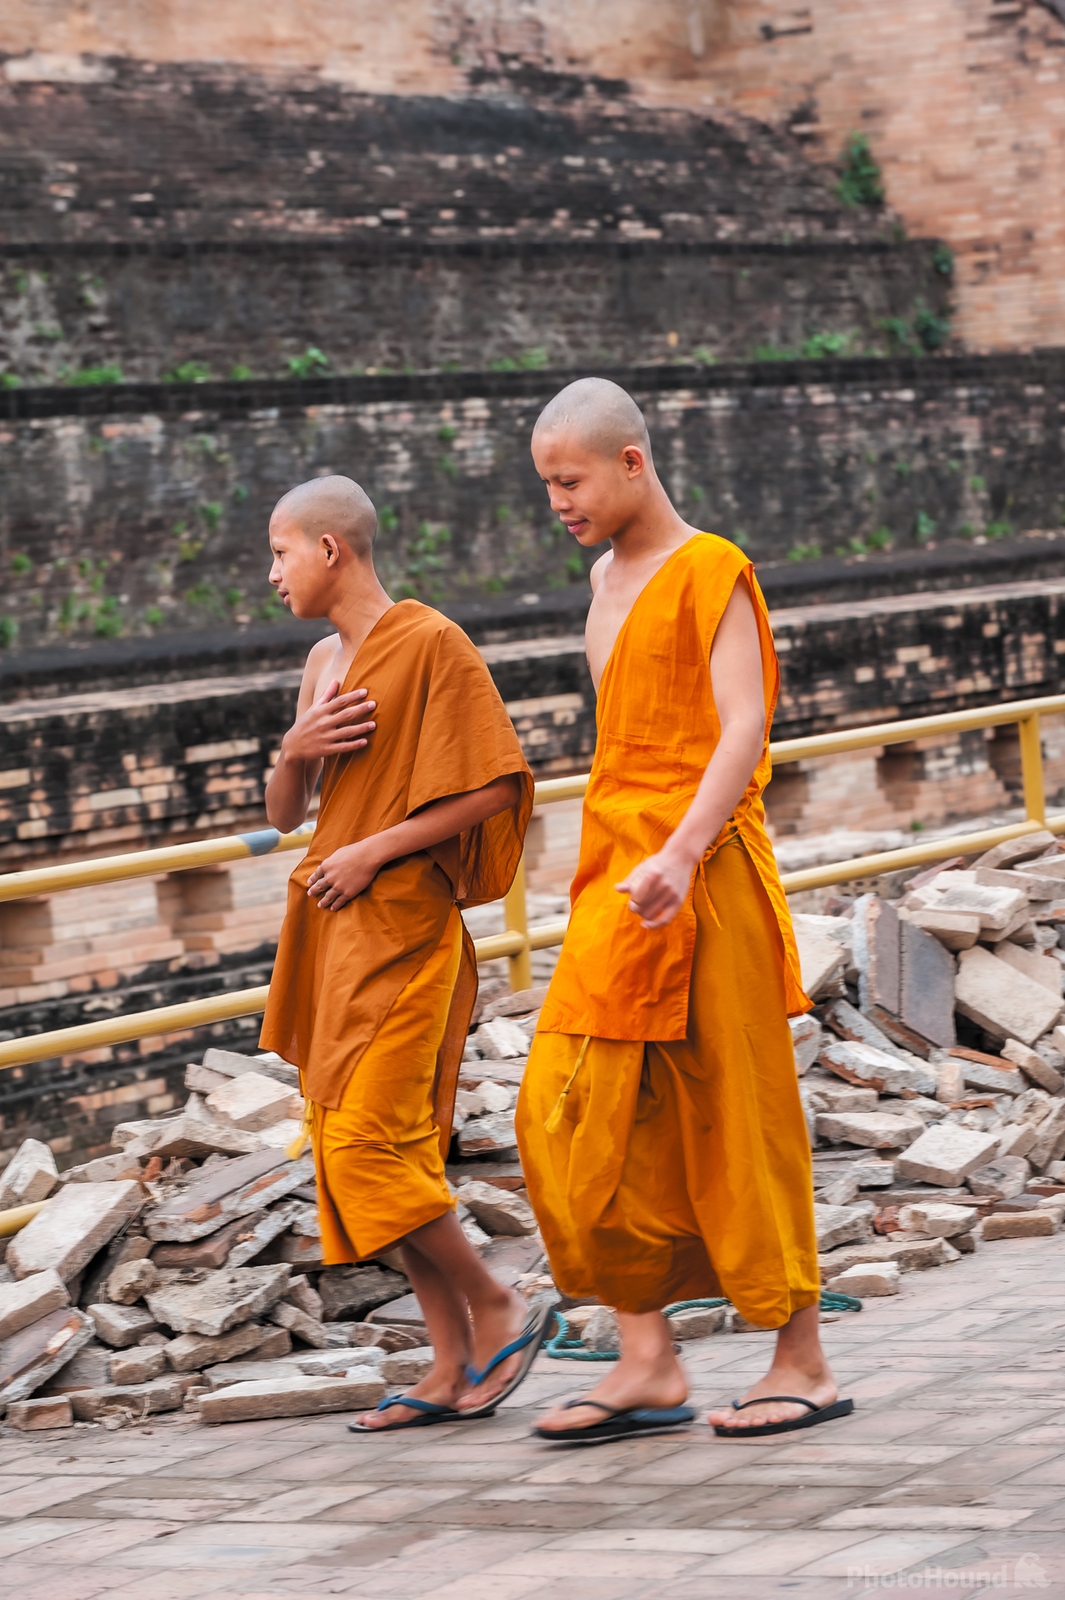 Image of Wat Chedi Luang by Sue Wolfe